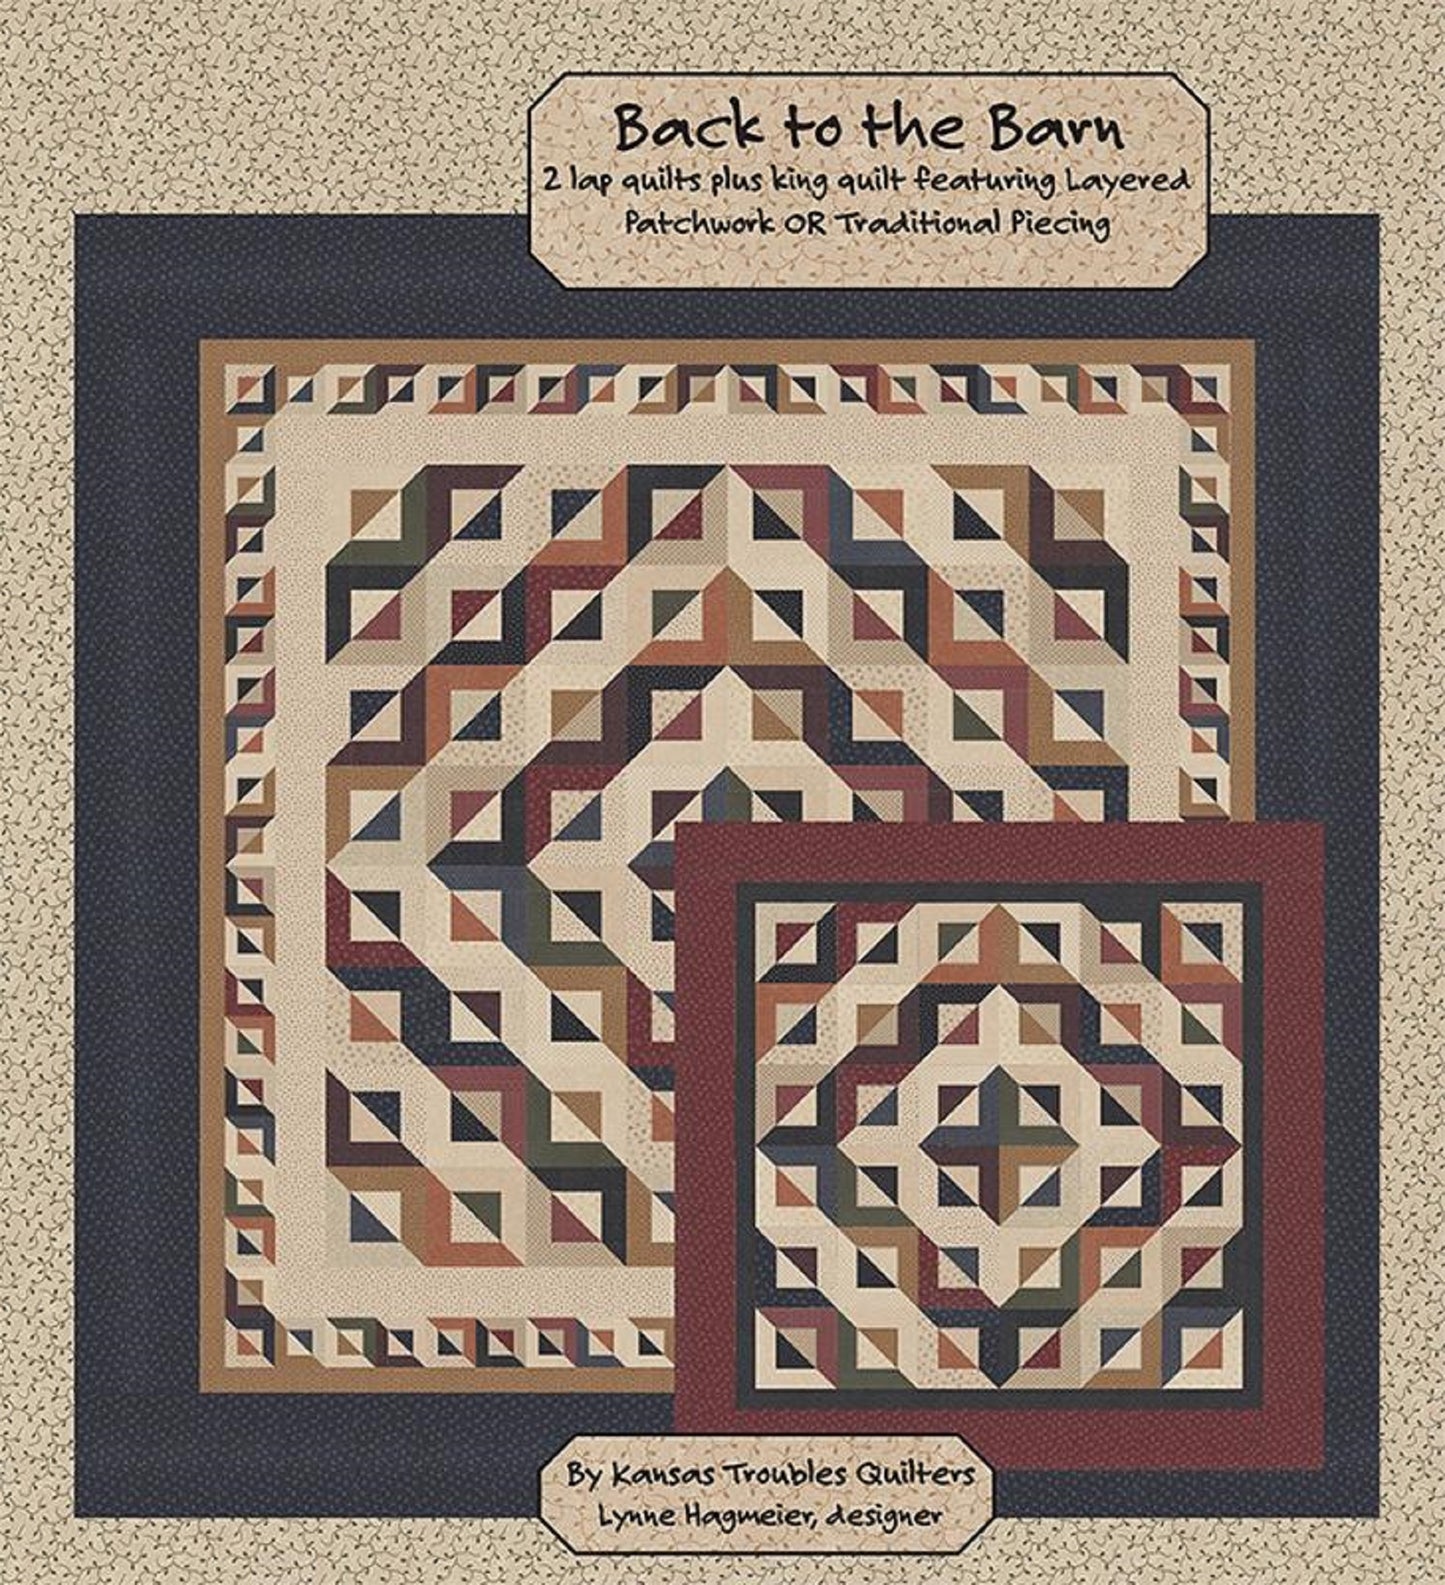 Back To The Barn Quilt Pattern by Kansas Troubles Quilters